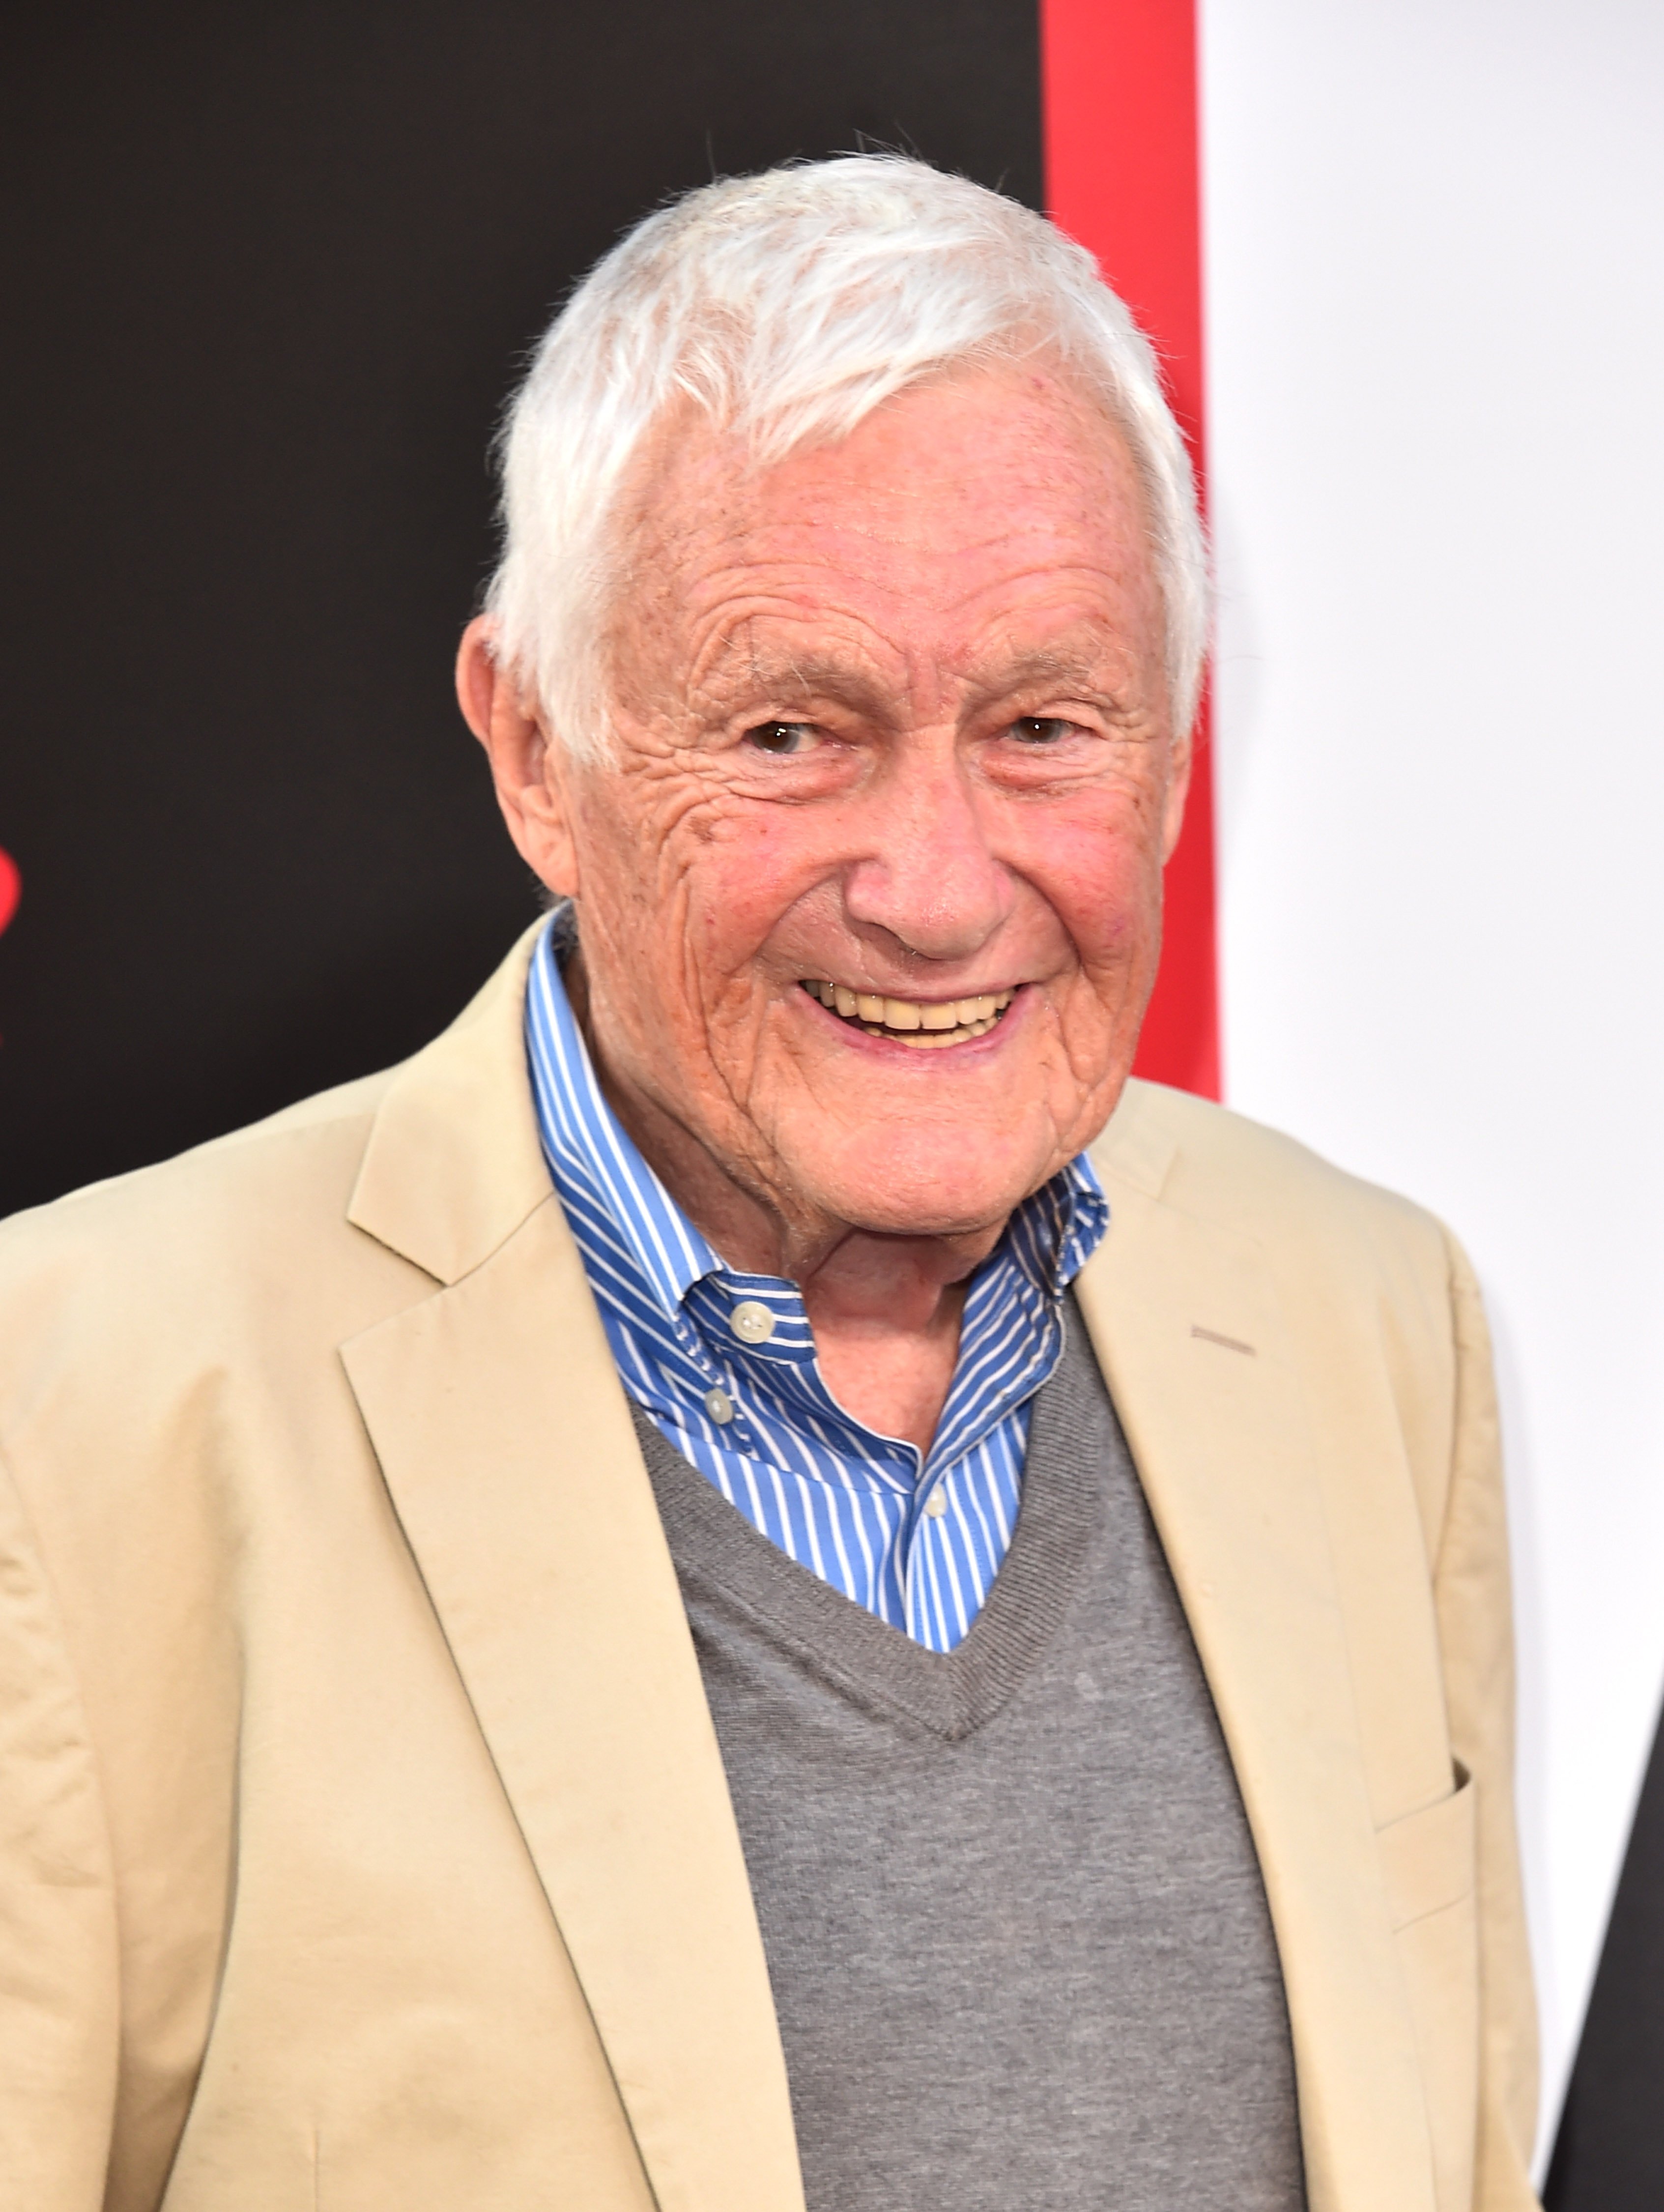 Orson Bean attends the premiere of "Equalizer 2" at the TCL Chinese Theatre on July 17, 2018 in Hollywood, California | Photo: Getty Images